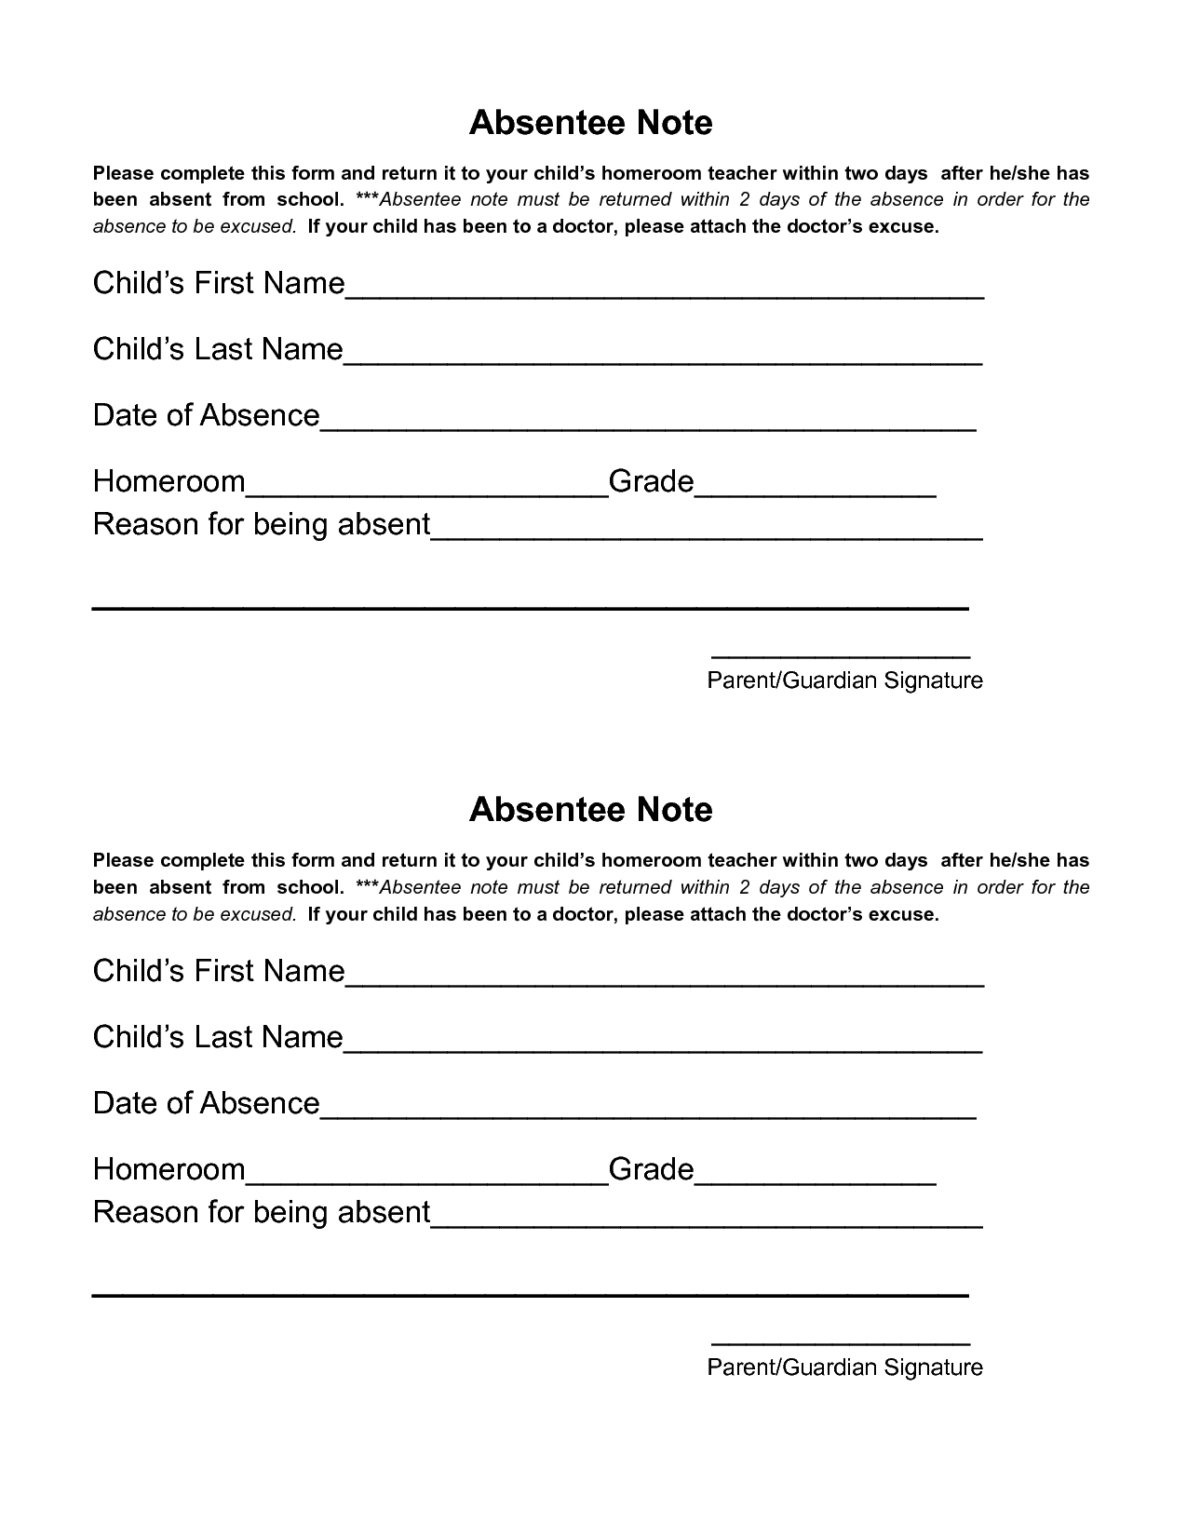 33-fake-doctors-note-template-download-for-work-school-with-medical